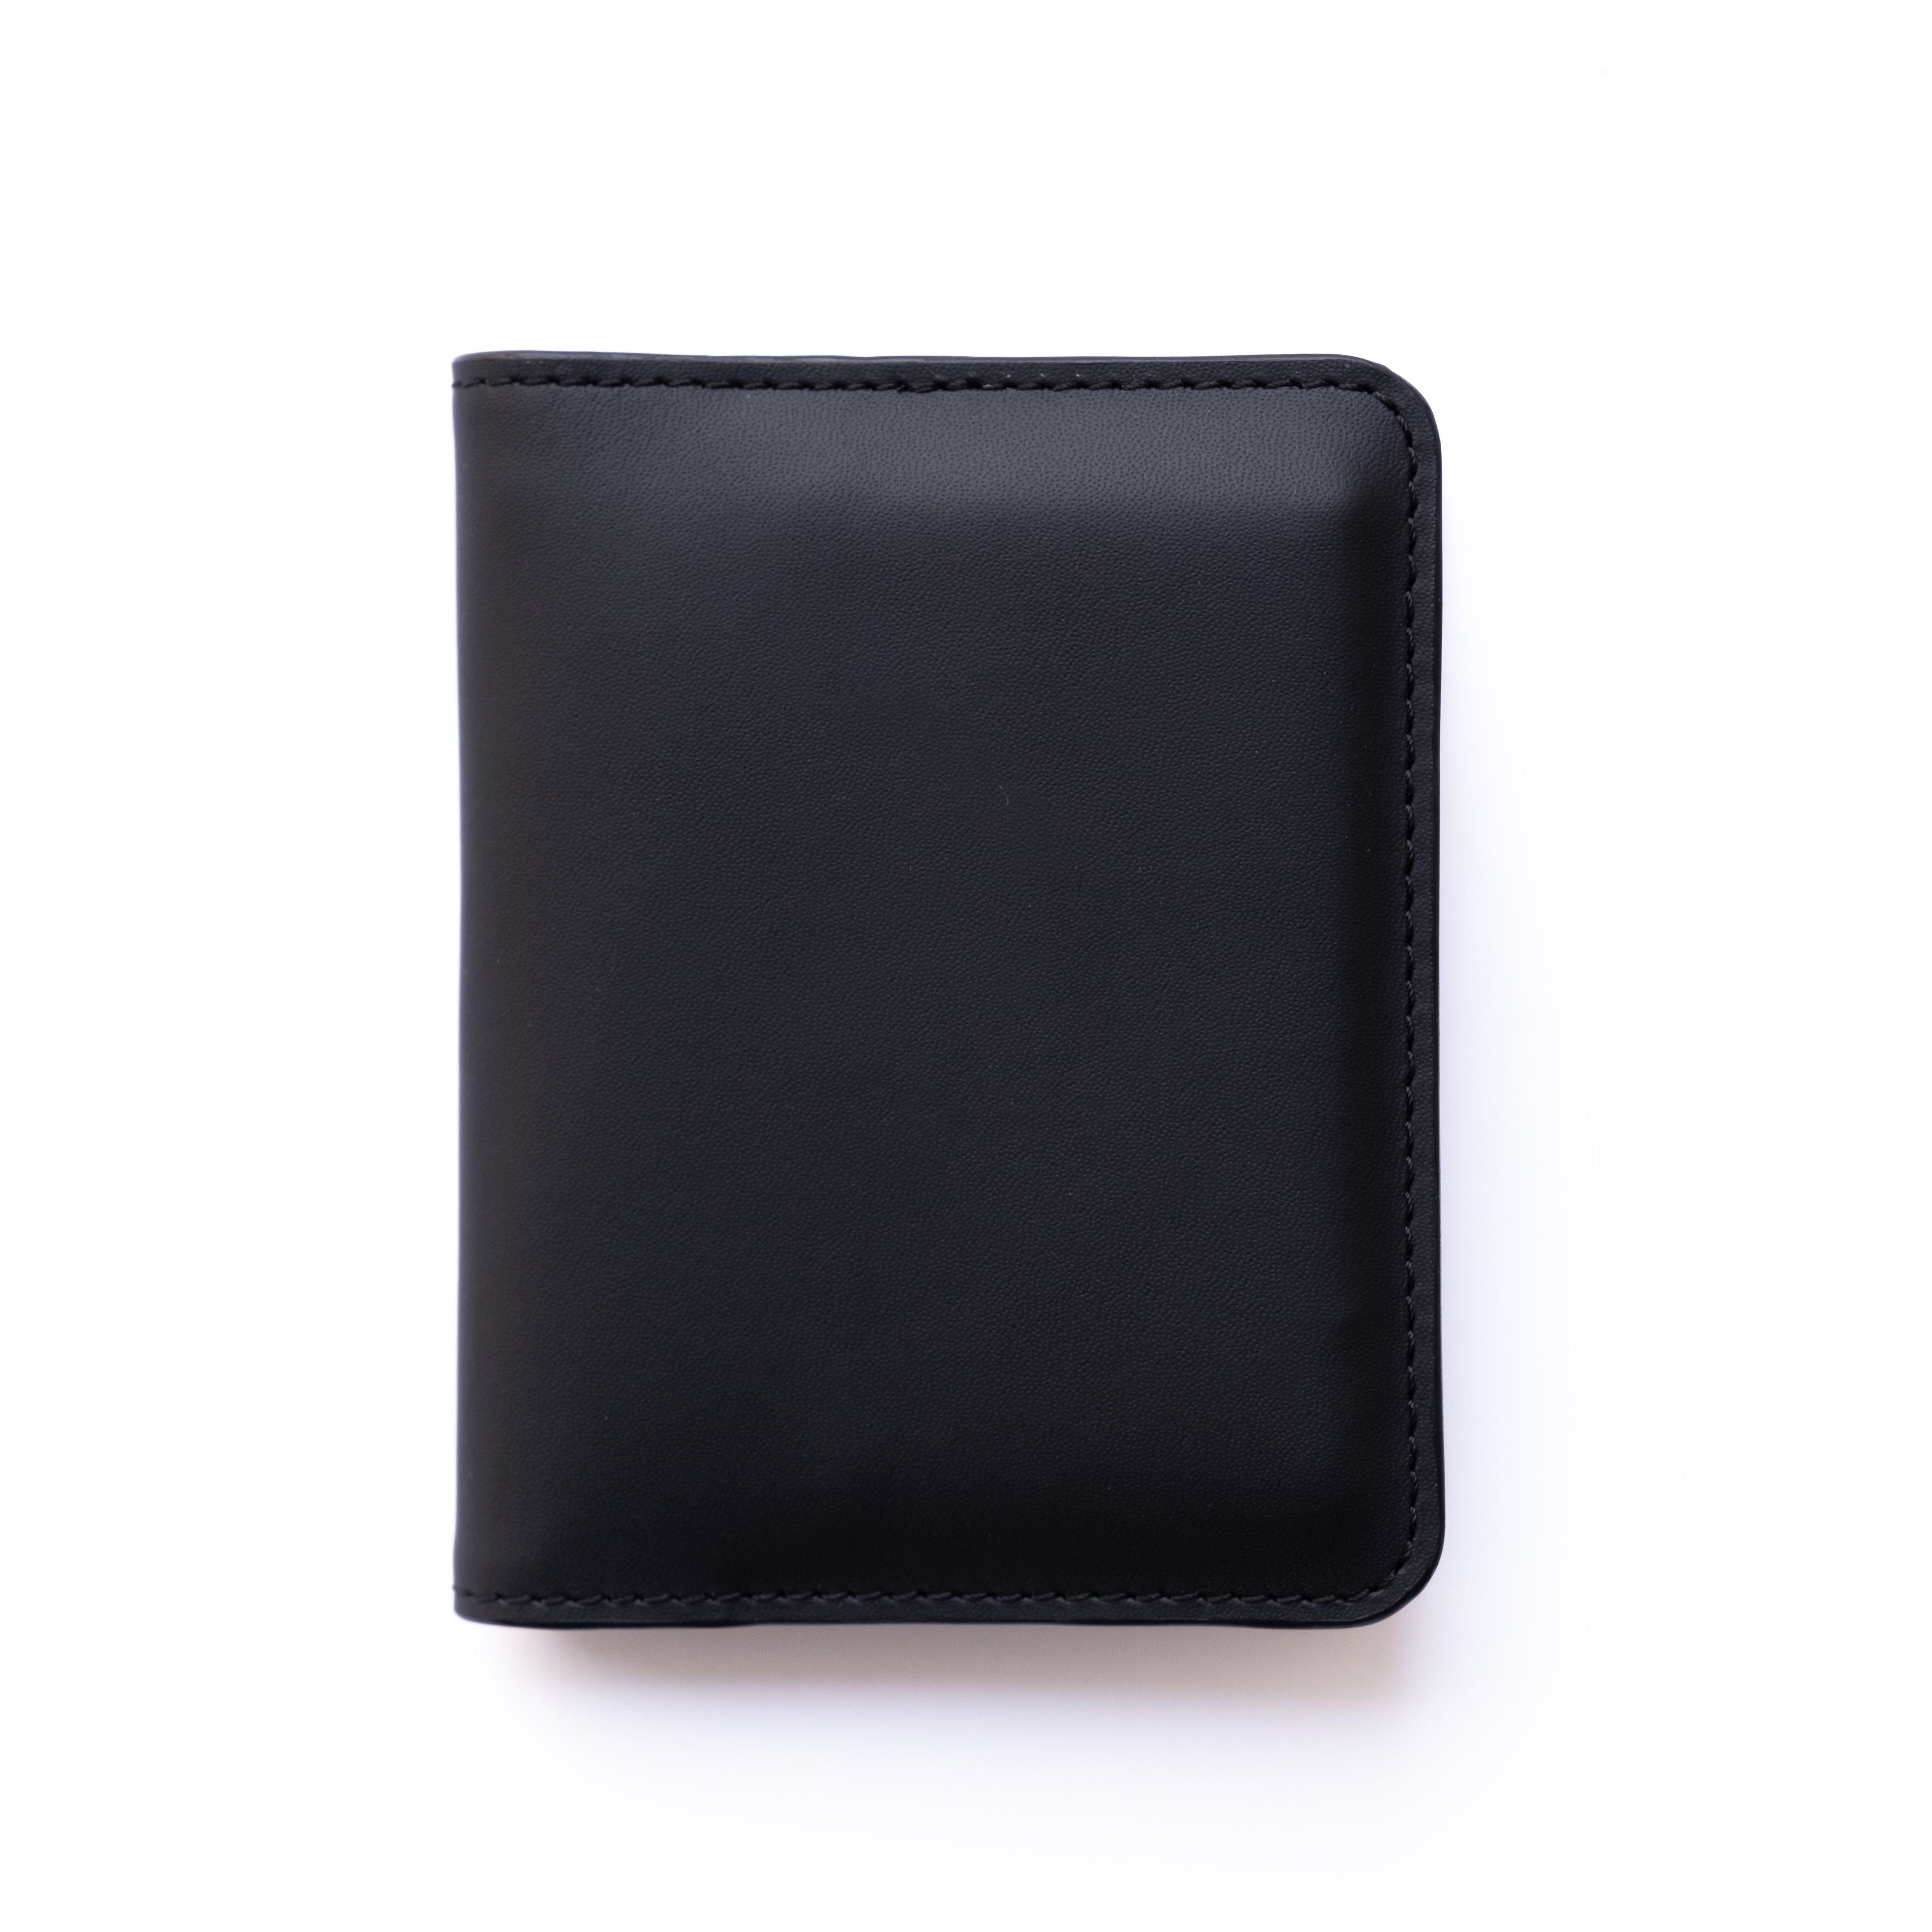 Everyday Professional - Bifold Wallet